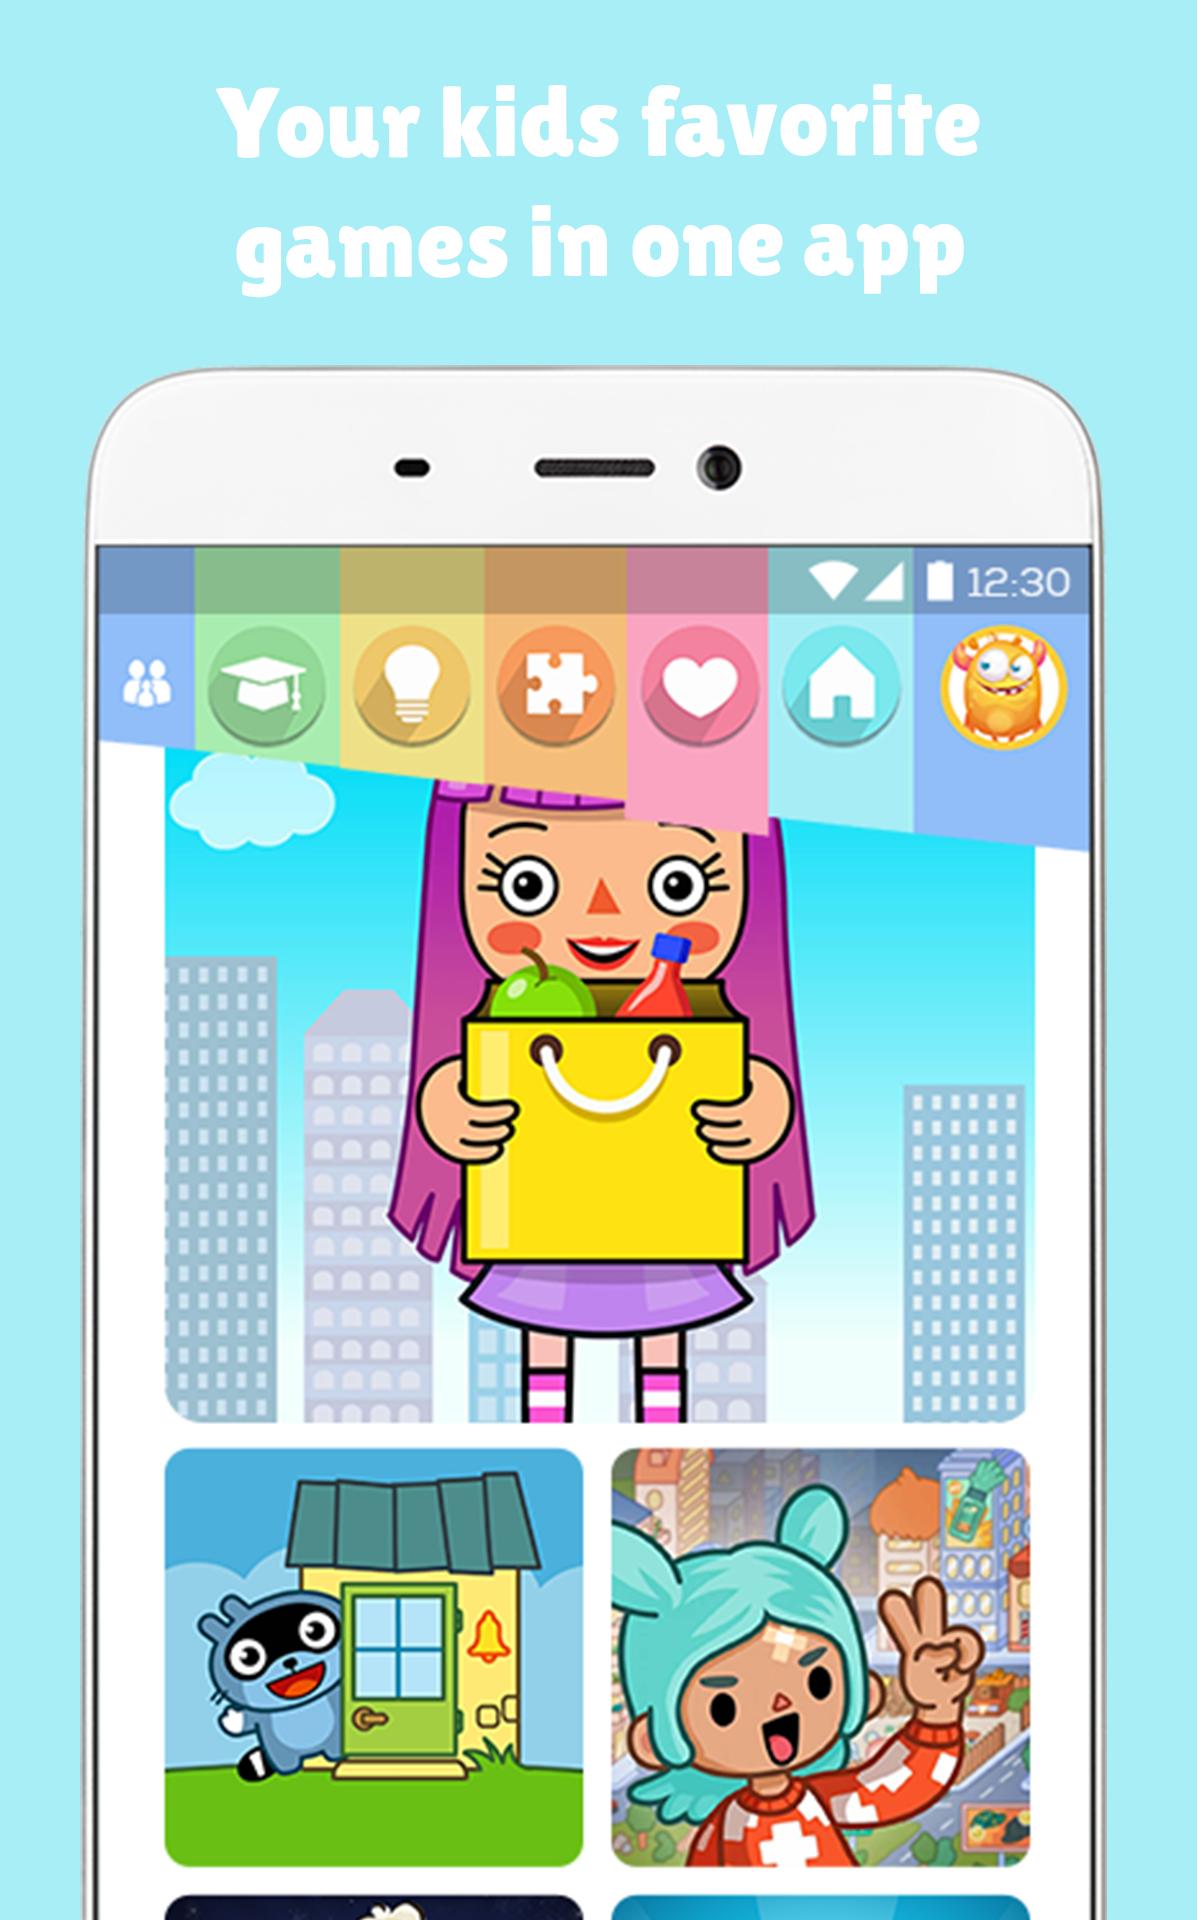 Hatch Kids Games for learning and creativity 2.1.0 Screenshot 1